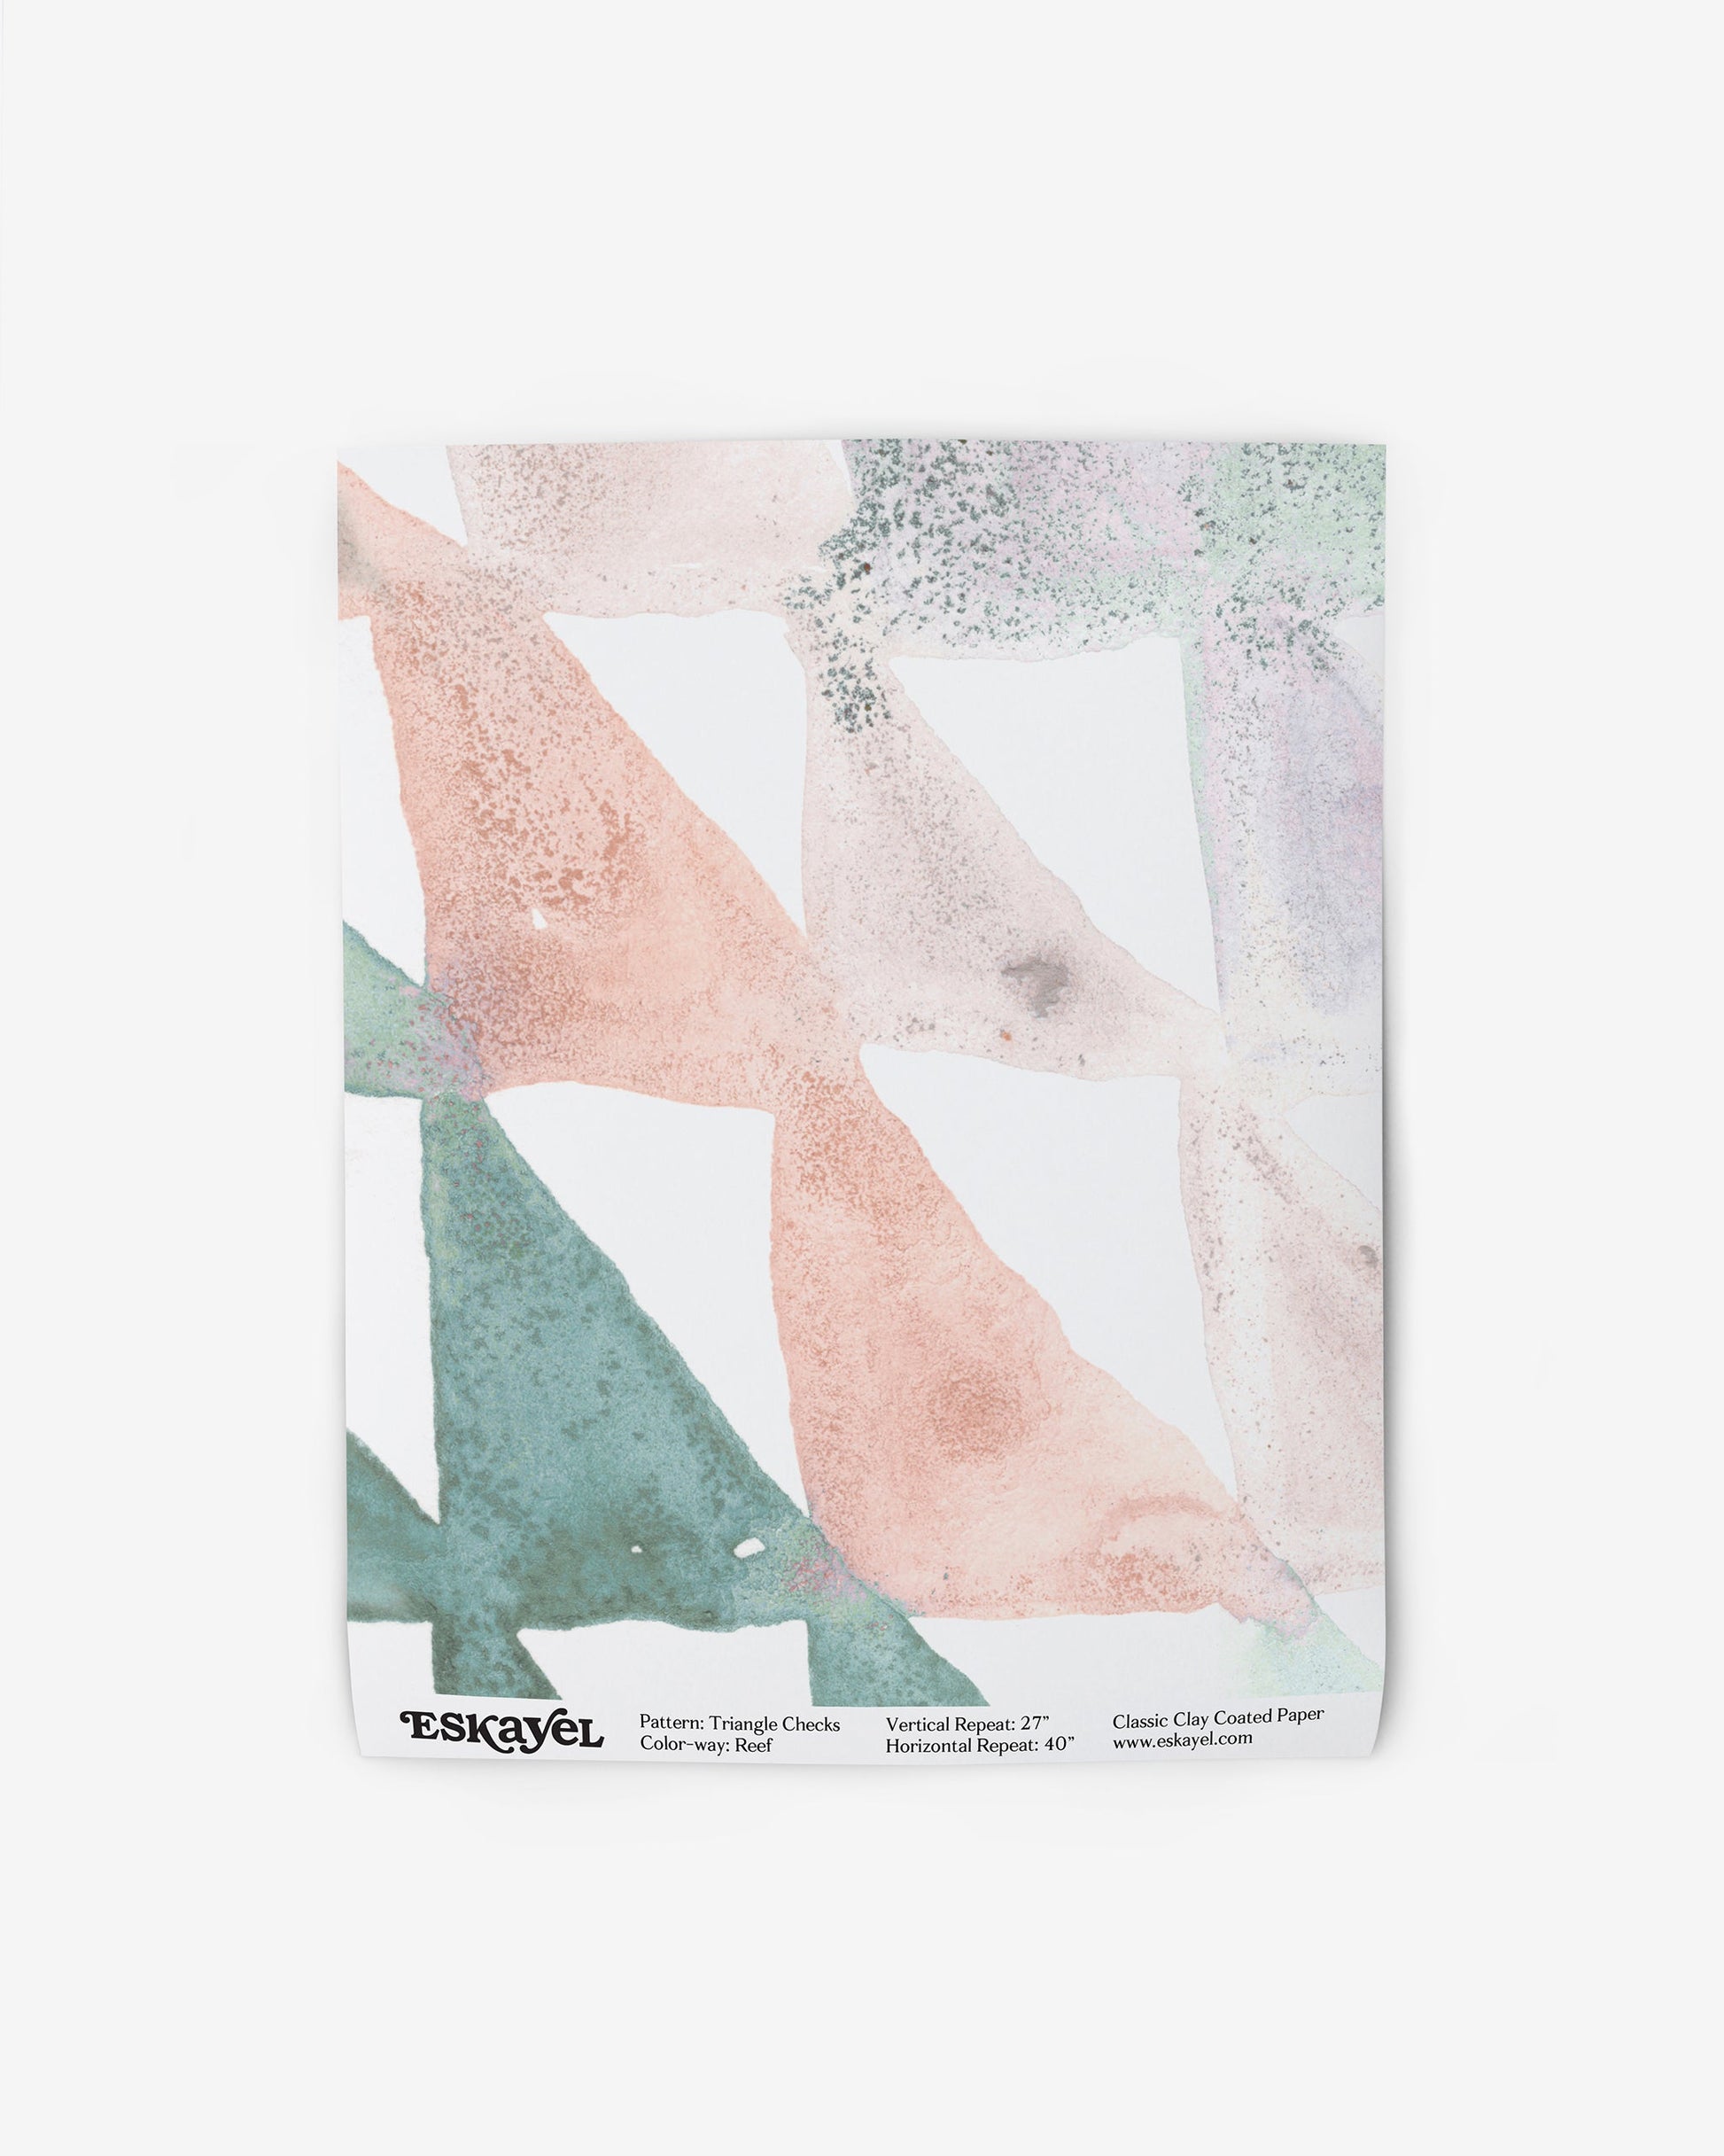 A white Triangle Checks Wallpaper||Reef with a pink, green, and blue pattern.